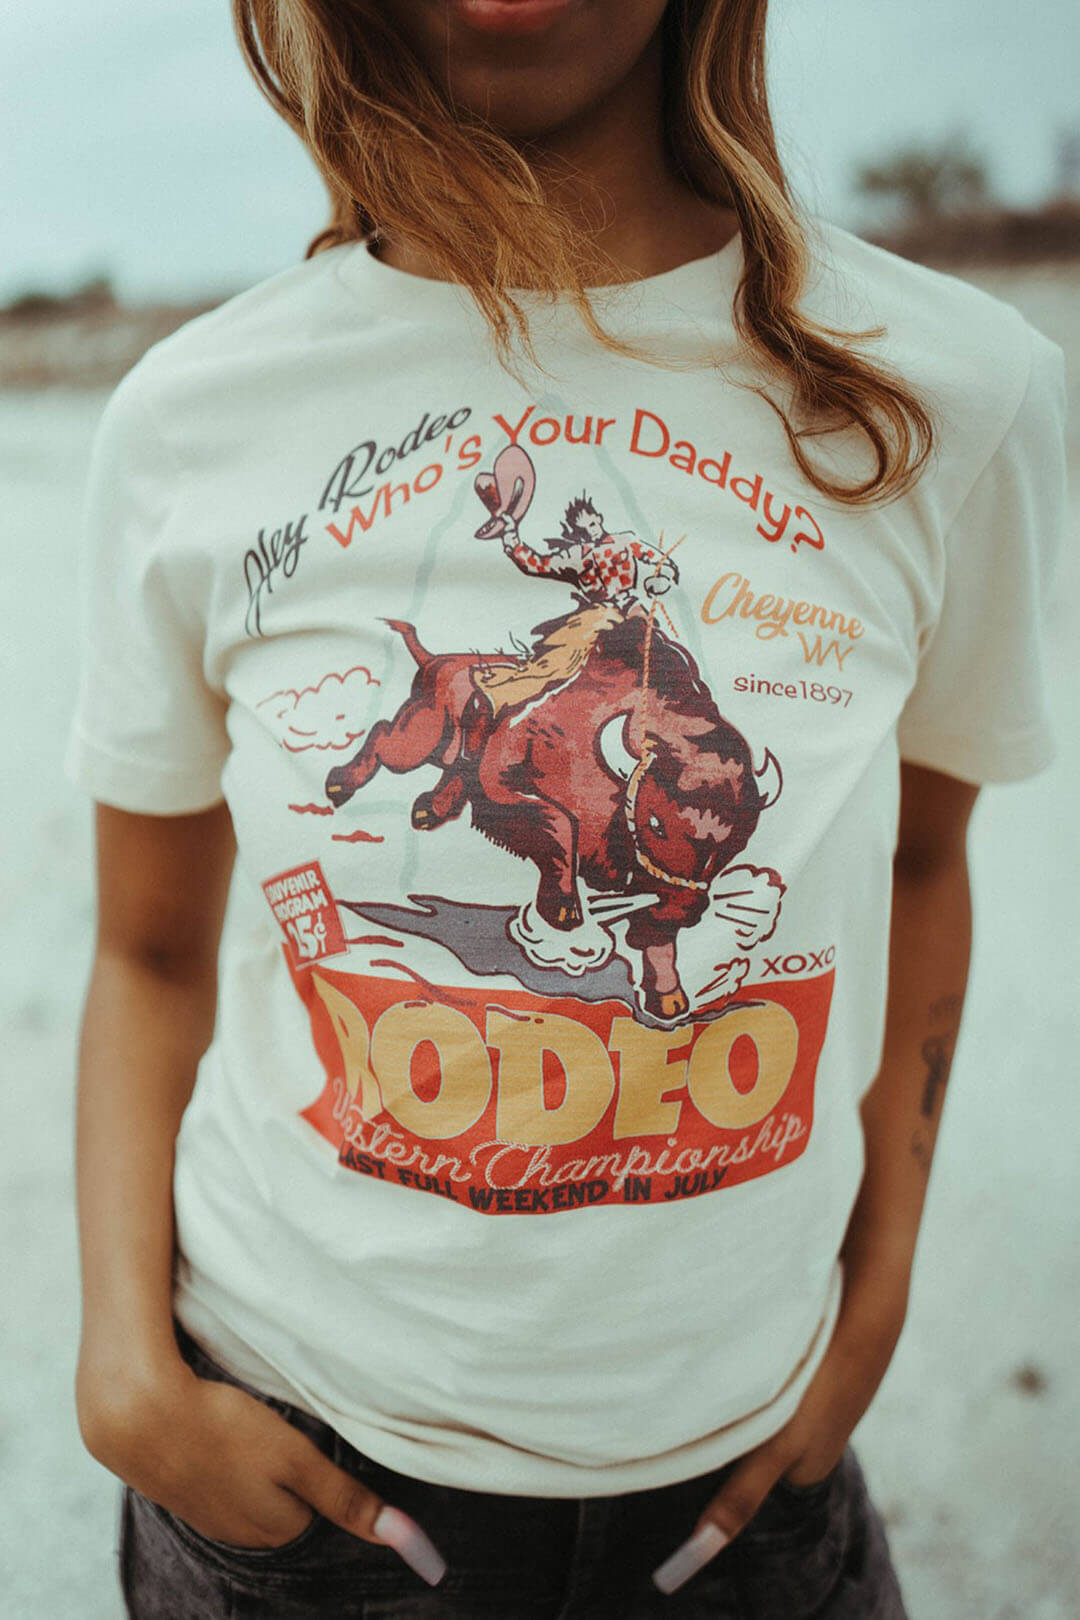 Close up image of the Cheyenne Souenir Rodeo graphic tee from XOXO art & company.  The shirt says"Hey Rodeo, Whos Your Daddy?